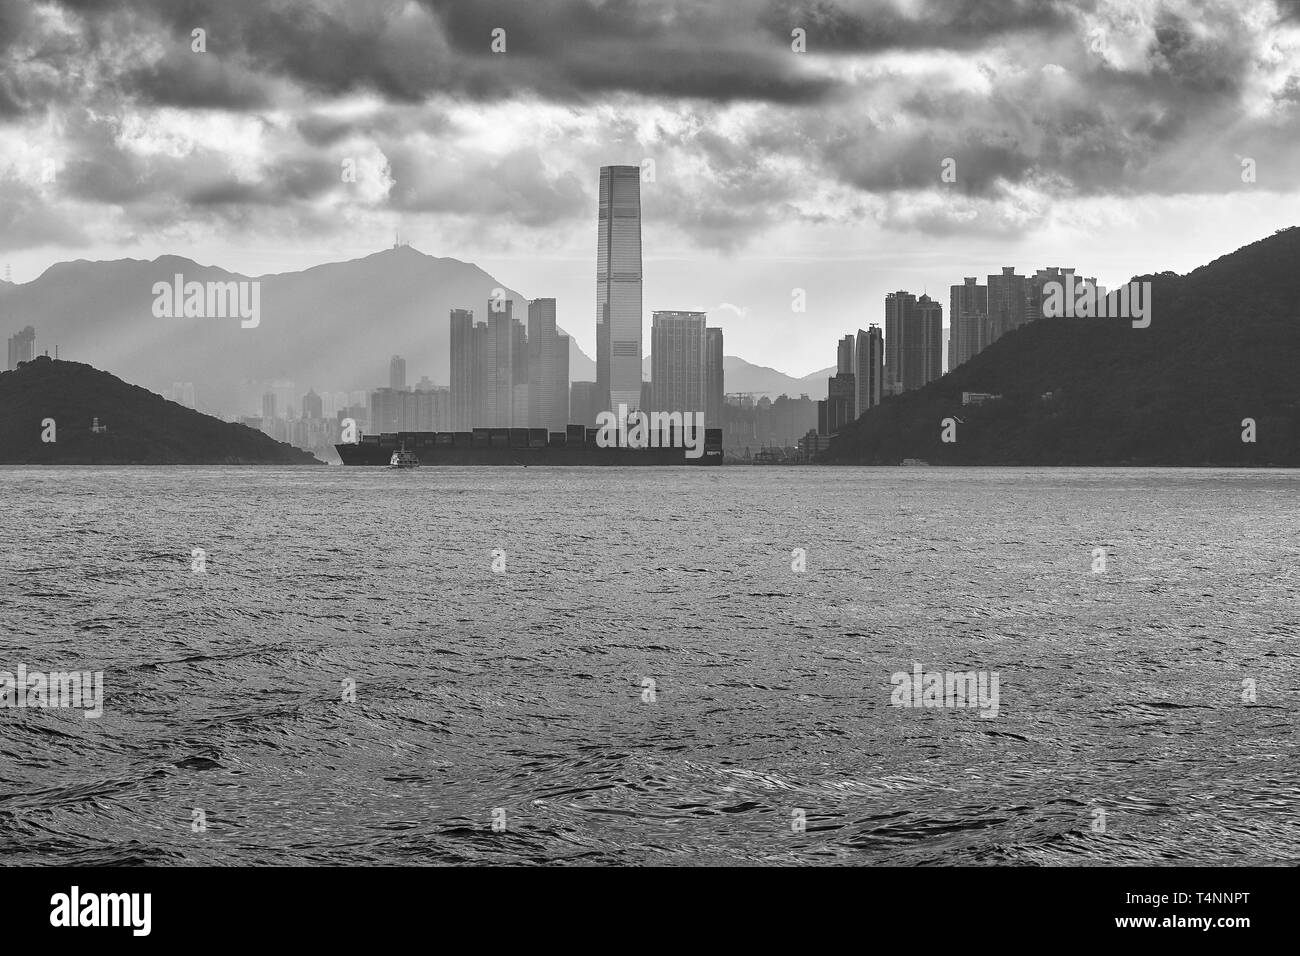 Moody Black And White Photo Of A Container Ship Passing In Front Of The Hong Kong Skyline As It Exits The East Lamma Channel Stock Photo